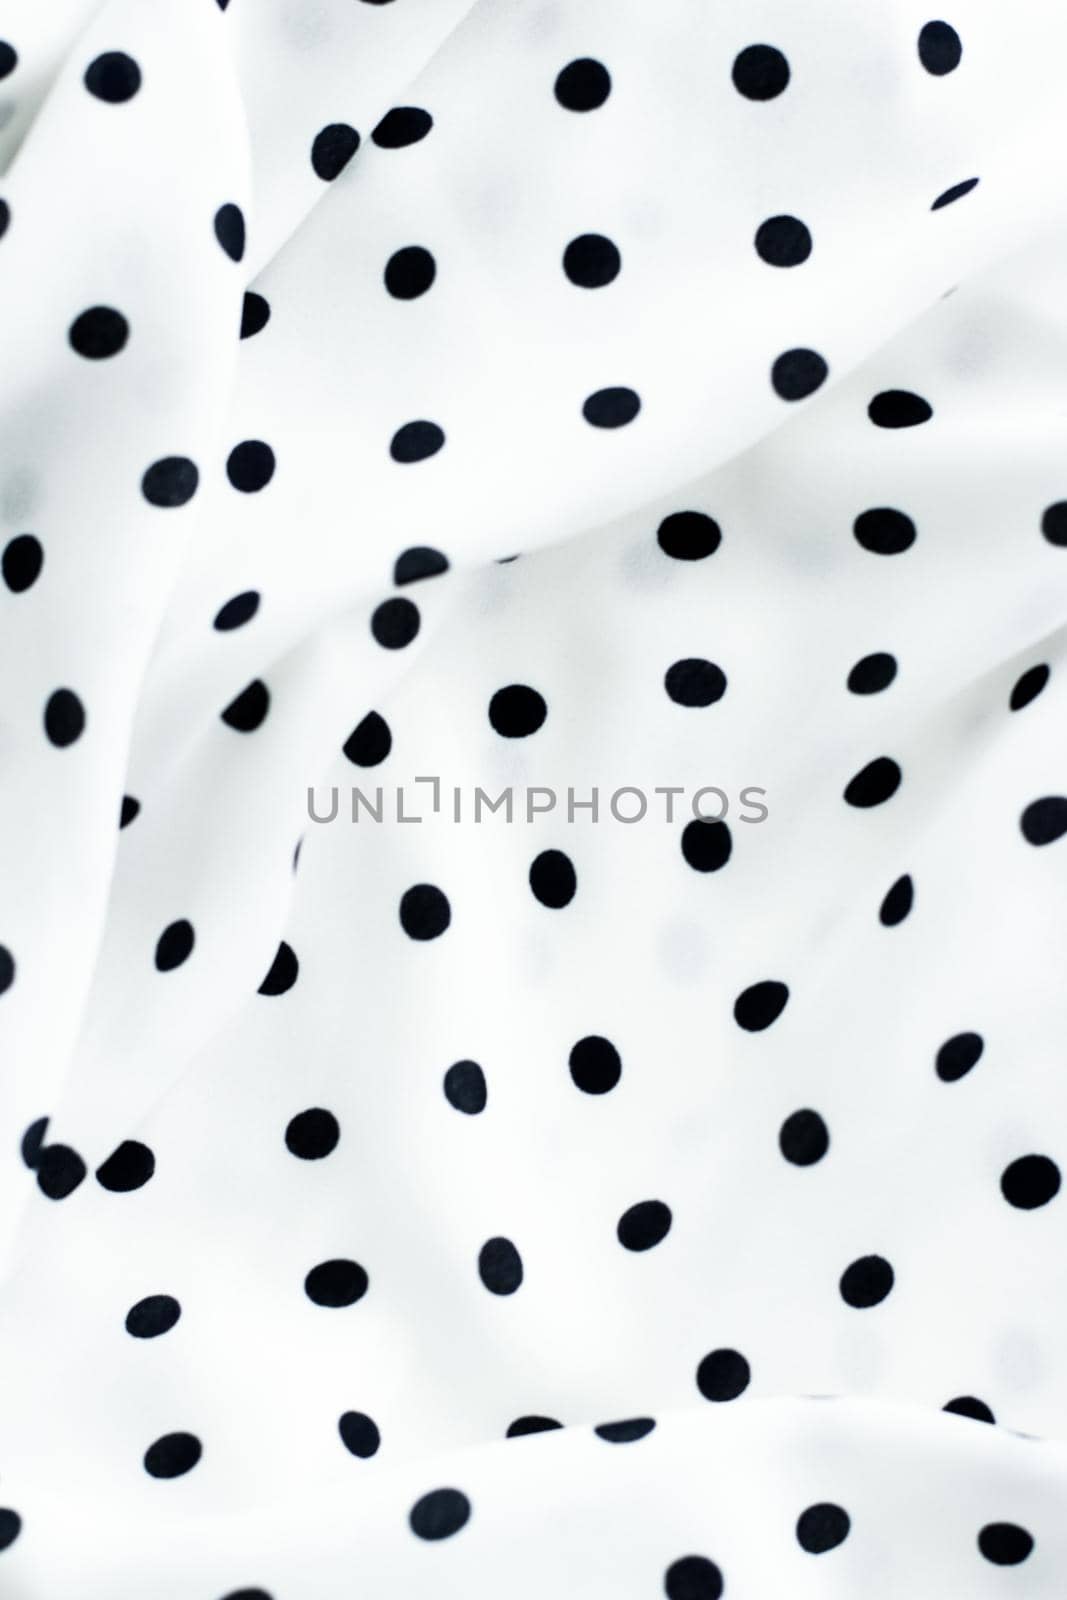 Fashion design, interior decor and vintage material concept - Classic polka dot textile background texture, black dots on white luxury fabric design pattern